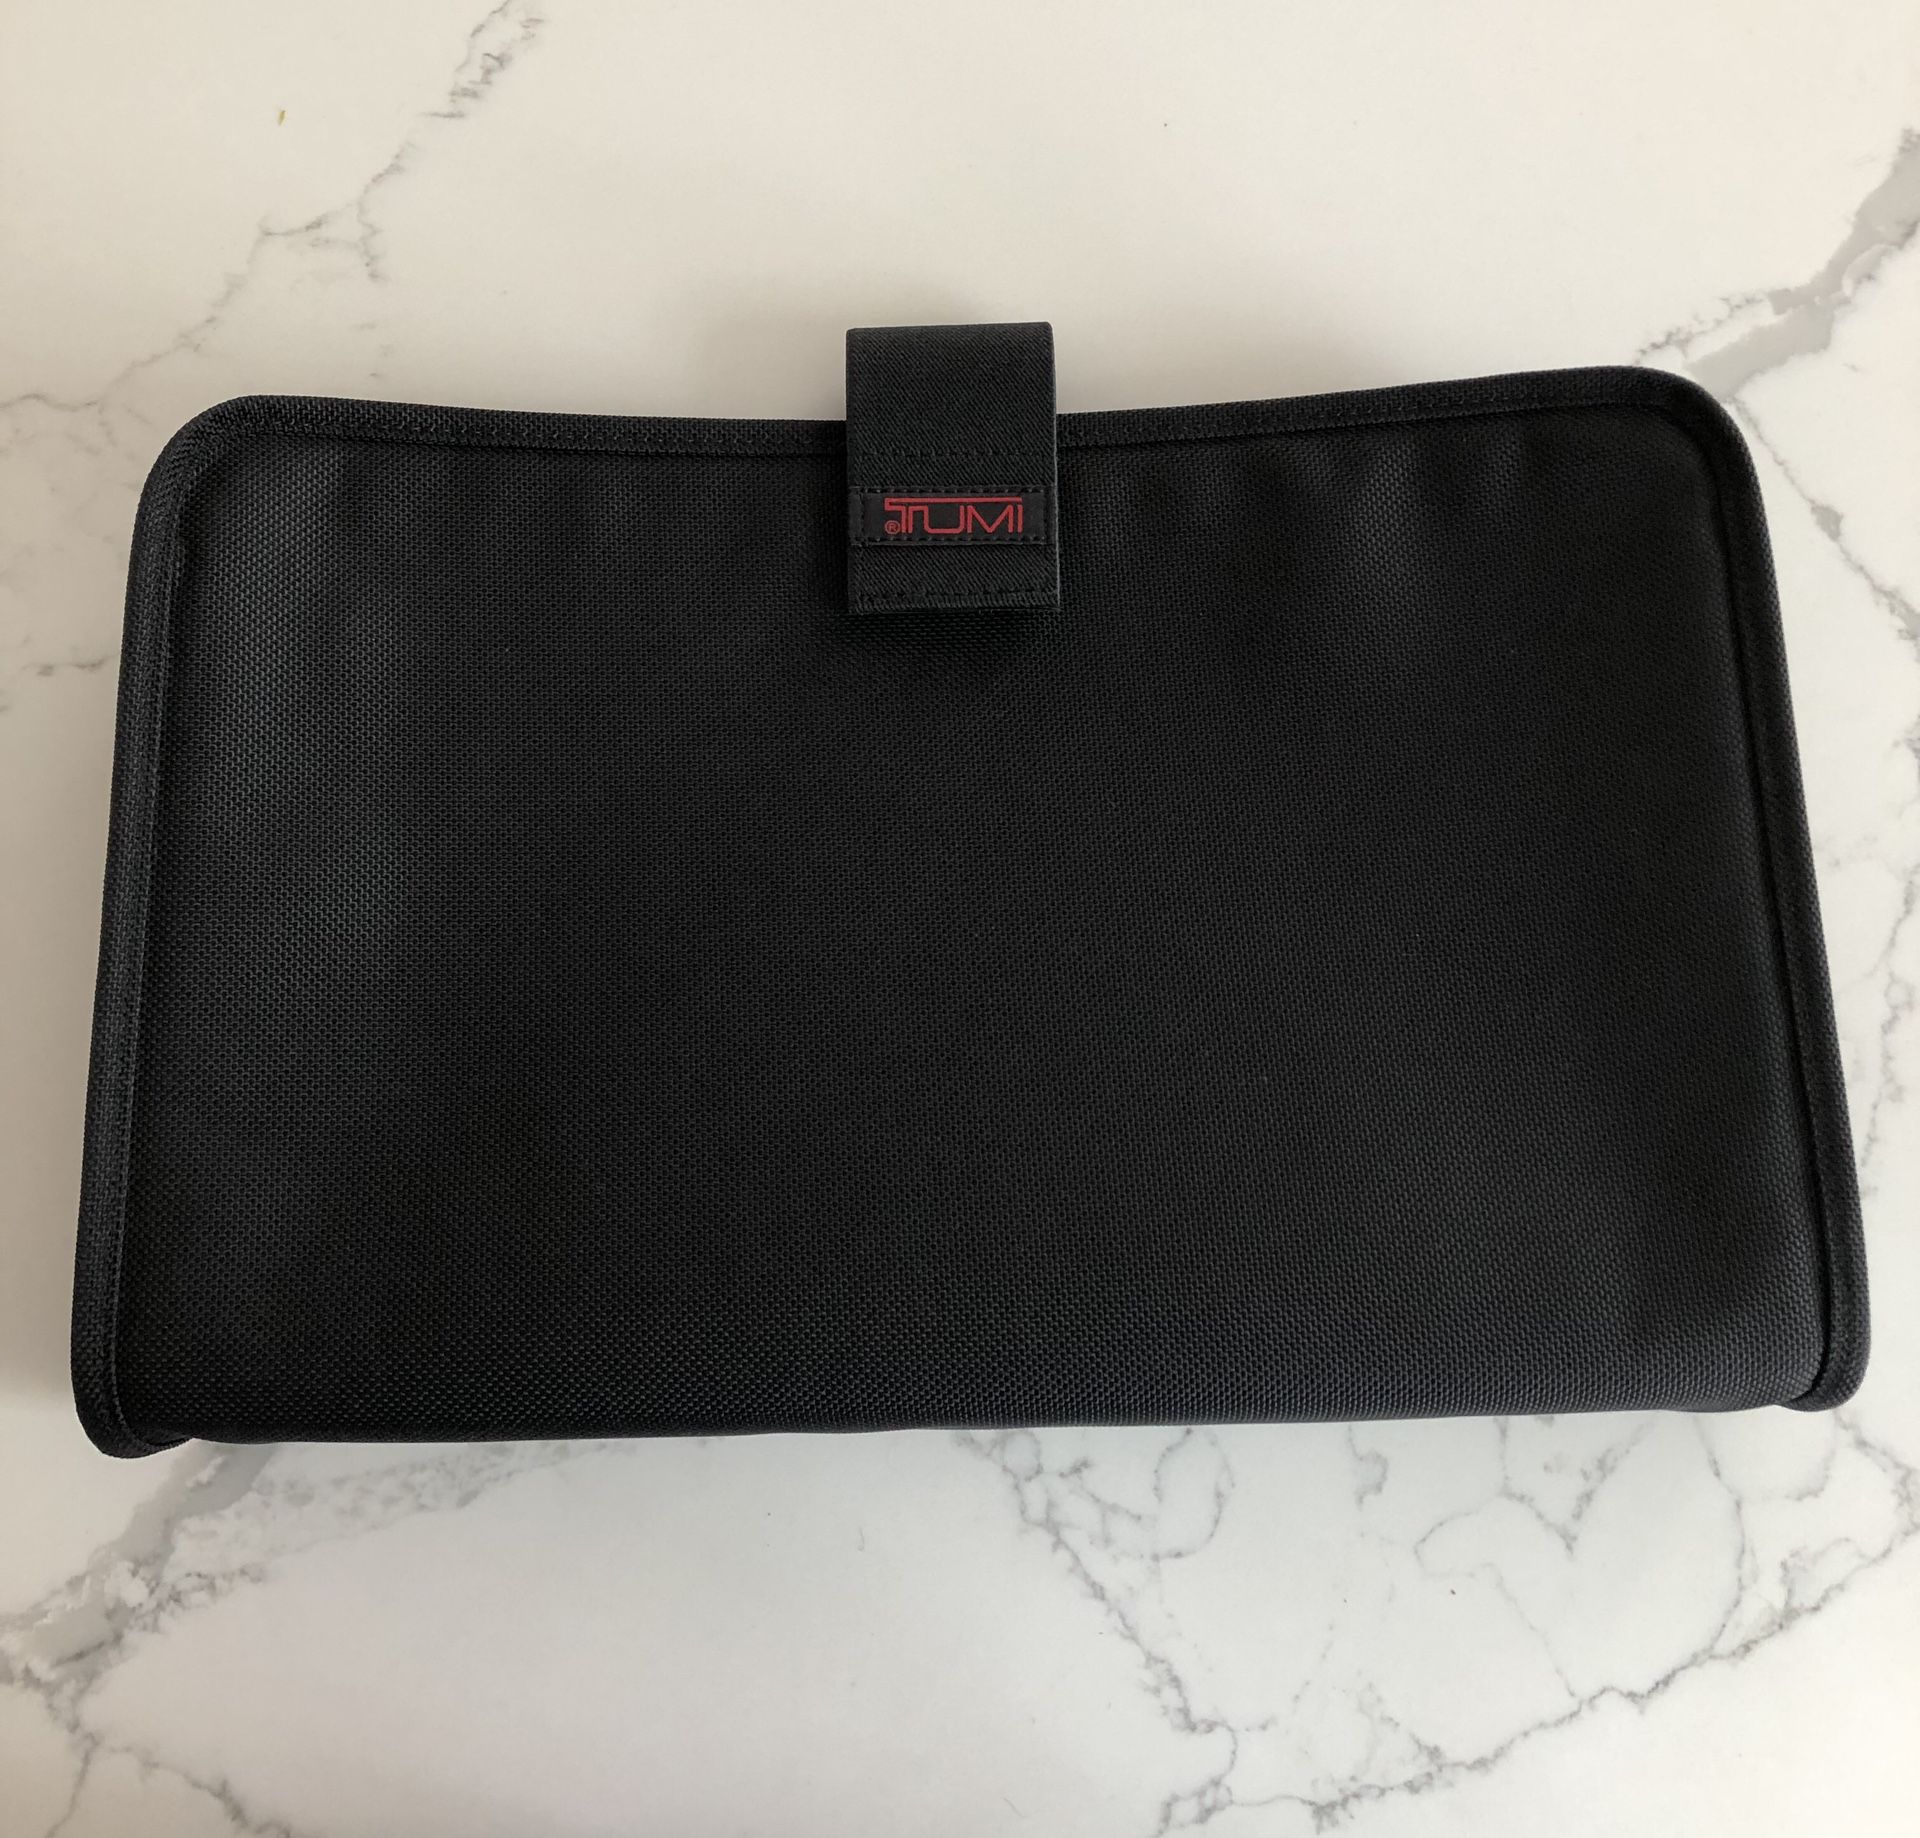 TUMI Black Ballistic Nylon Padded Laptop Tablet Protective Sleeve Case Fits 15". Never used. Measurements are 15” x 9”. Velcro close. Smoke free home.